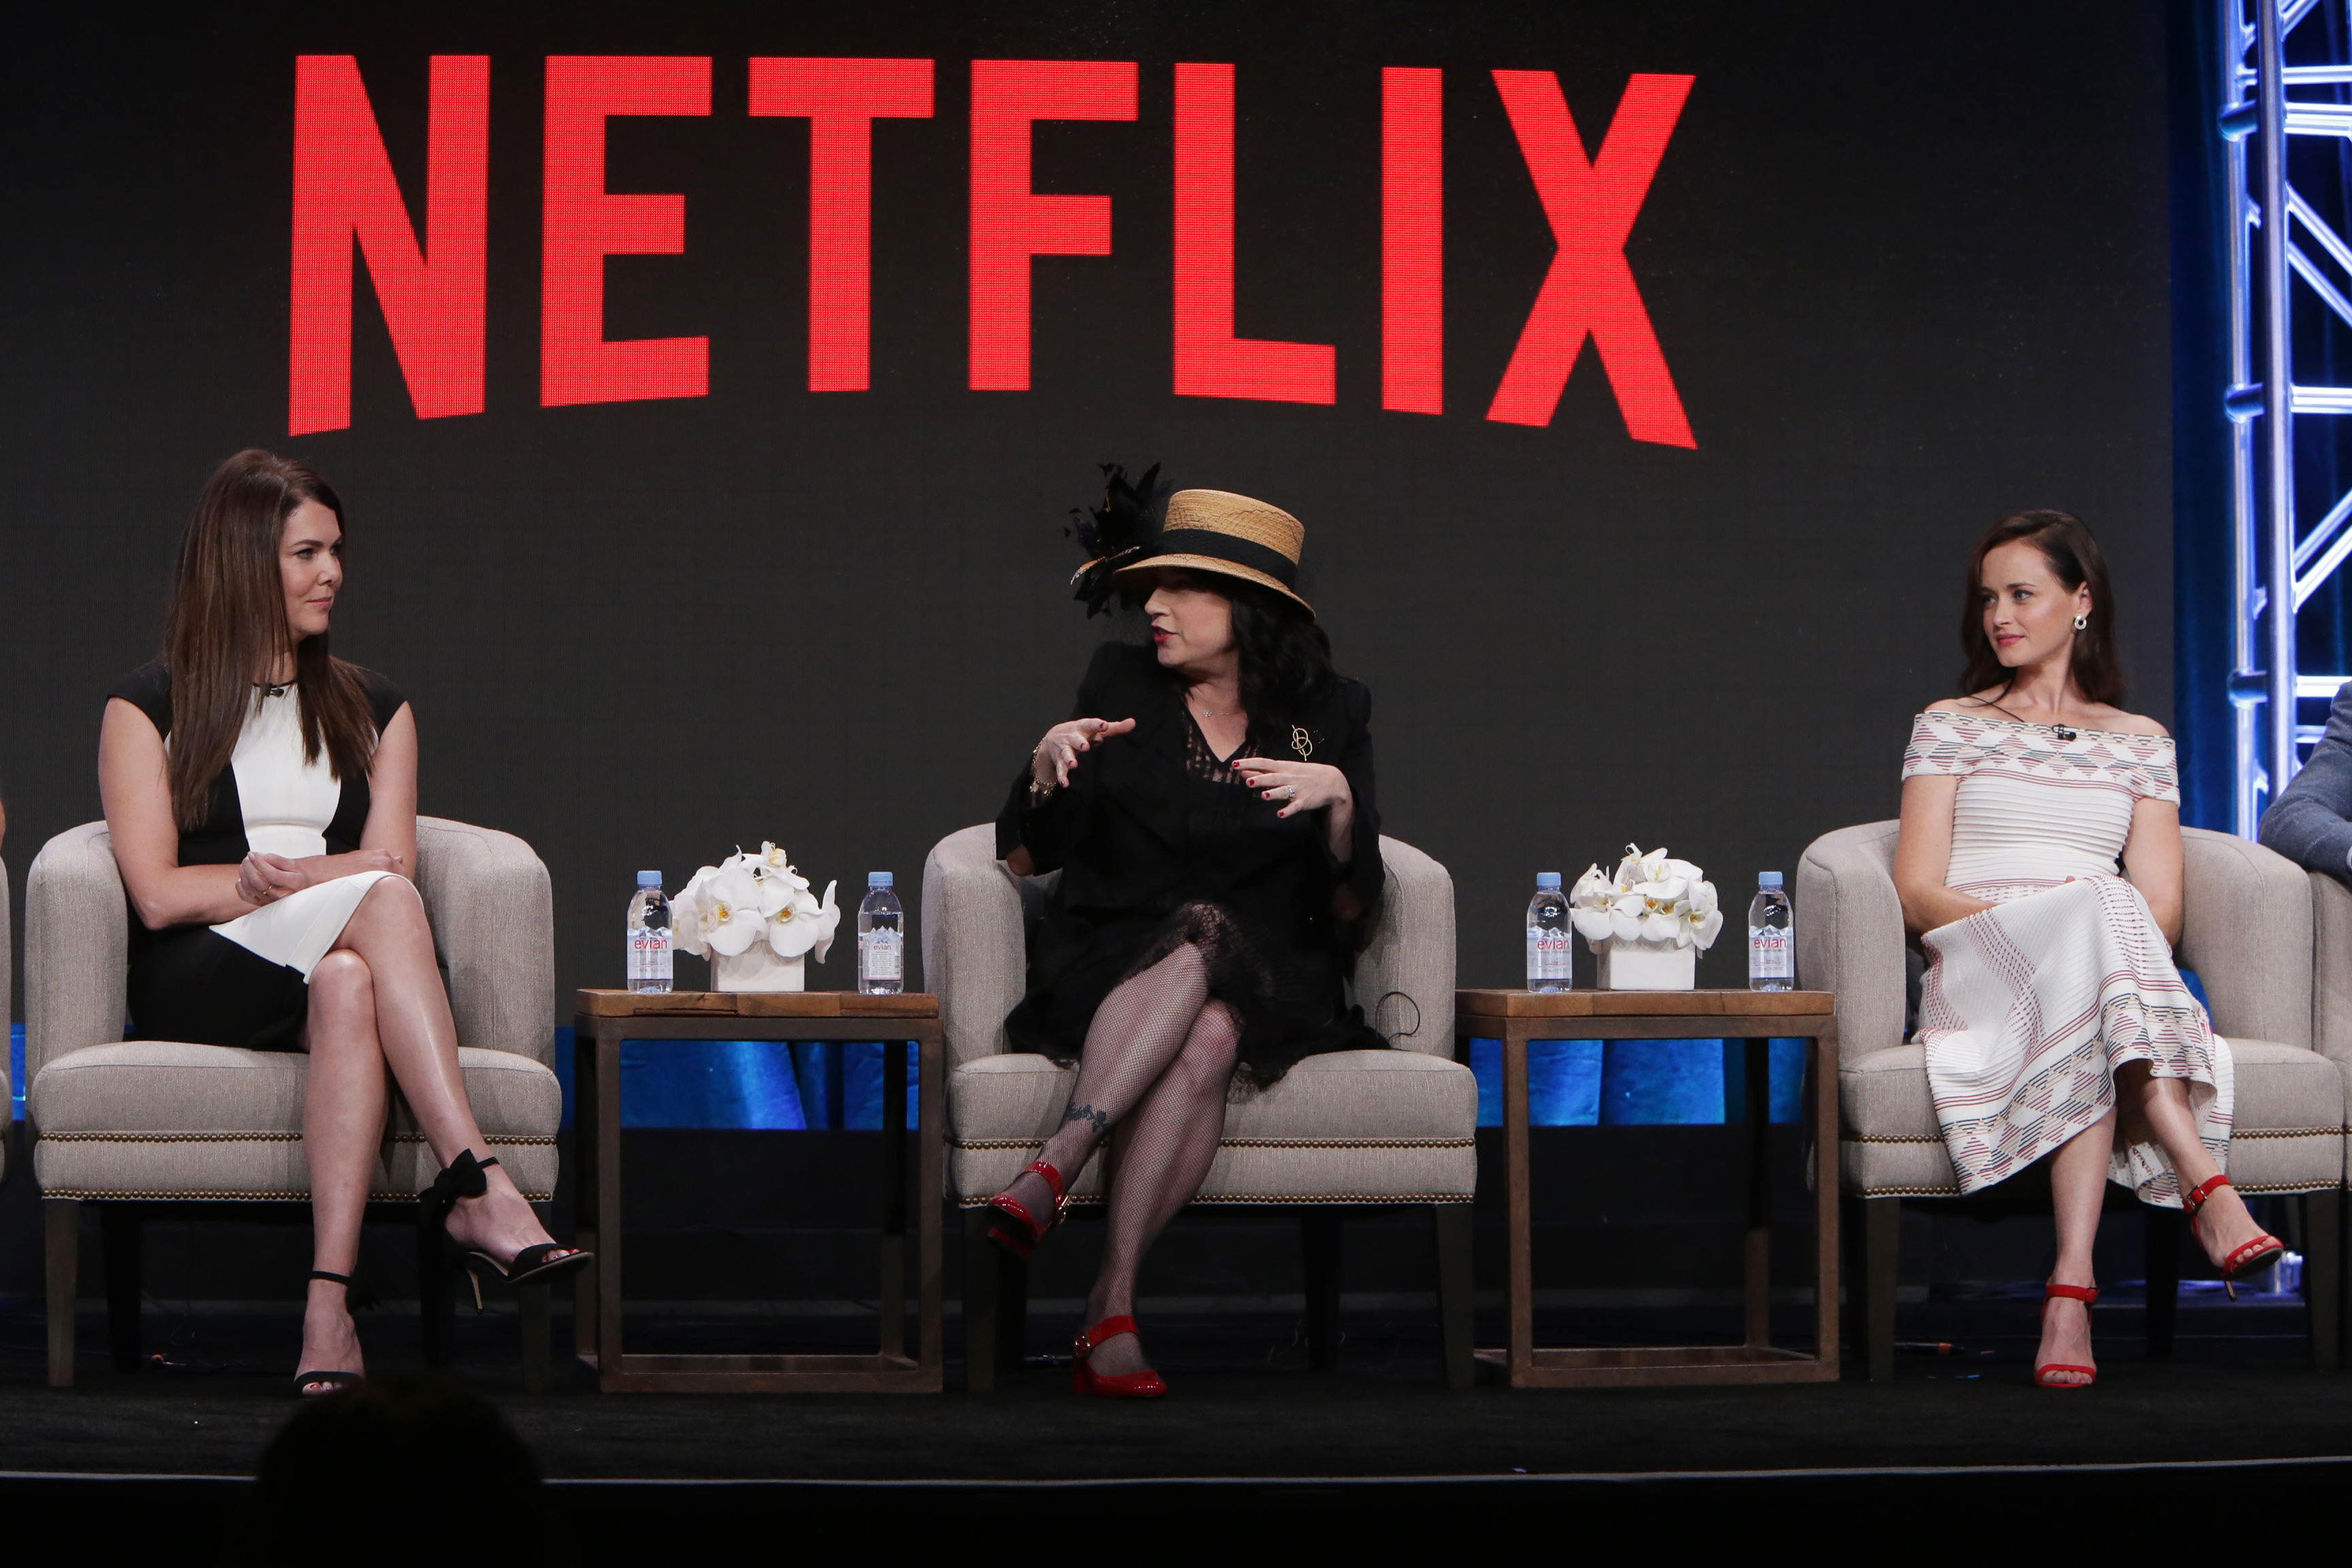 Lauren Graham, Amy Shermna-Palladino and Alexis Bledel at Netflix 2016 Summer TCA at the Beverly Hilton Hotel